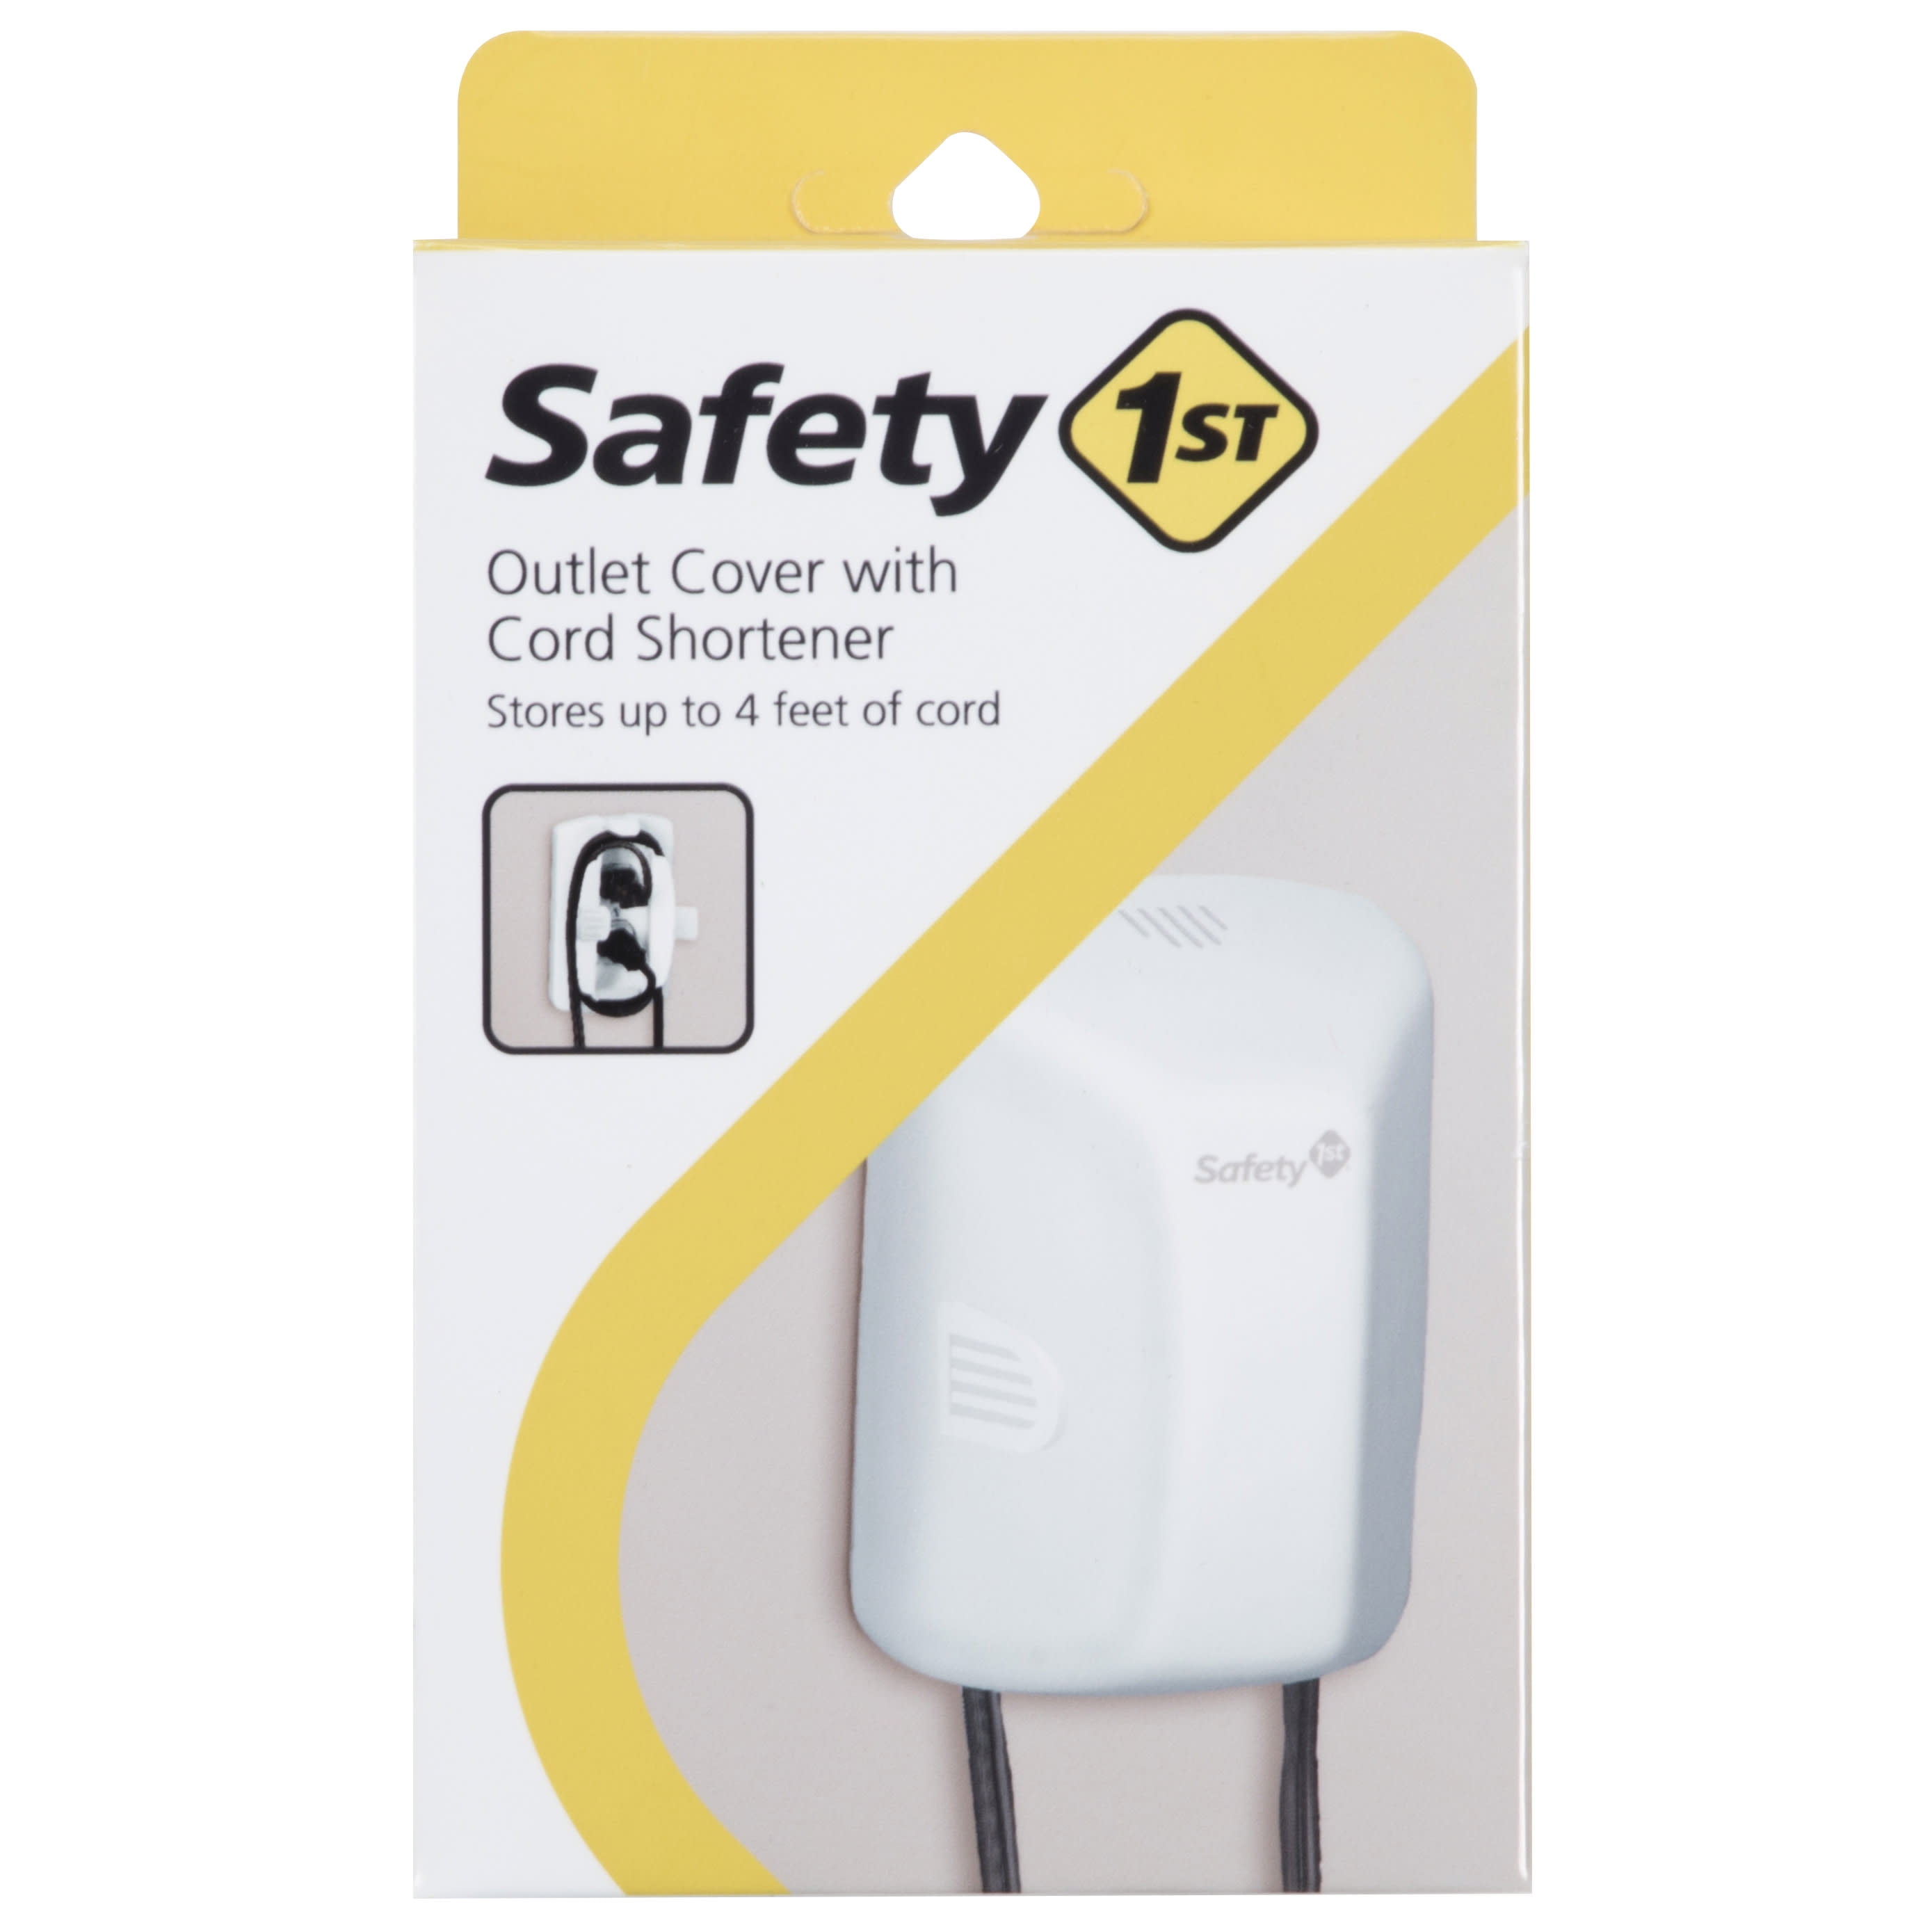 Safety 1ˢᵗ Outlet Cover with Cord Shortener, White